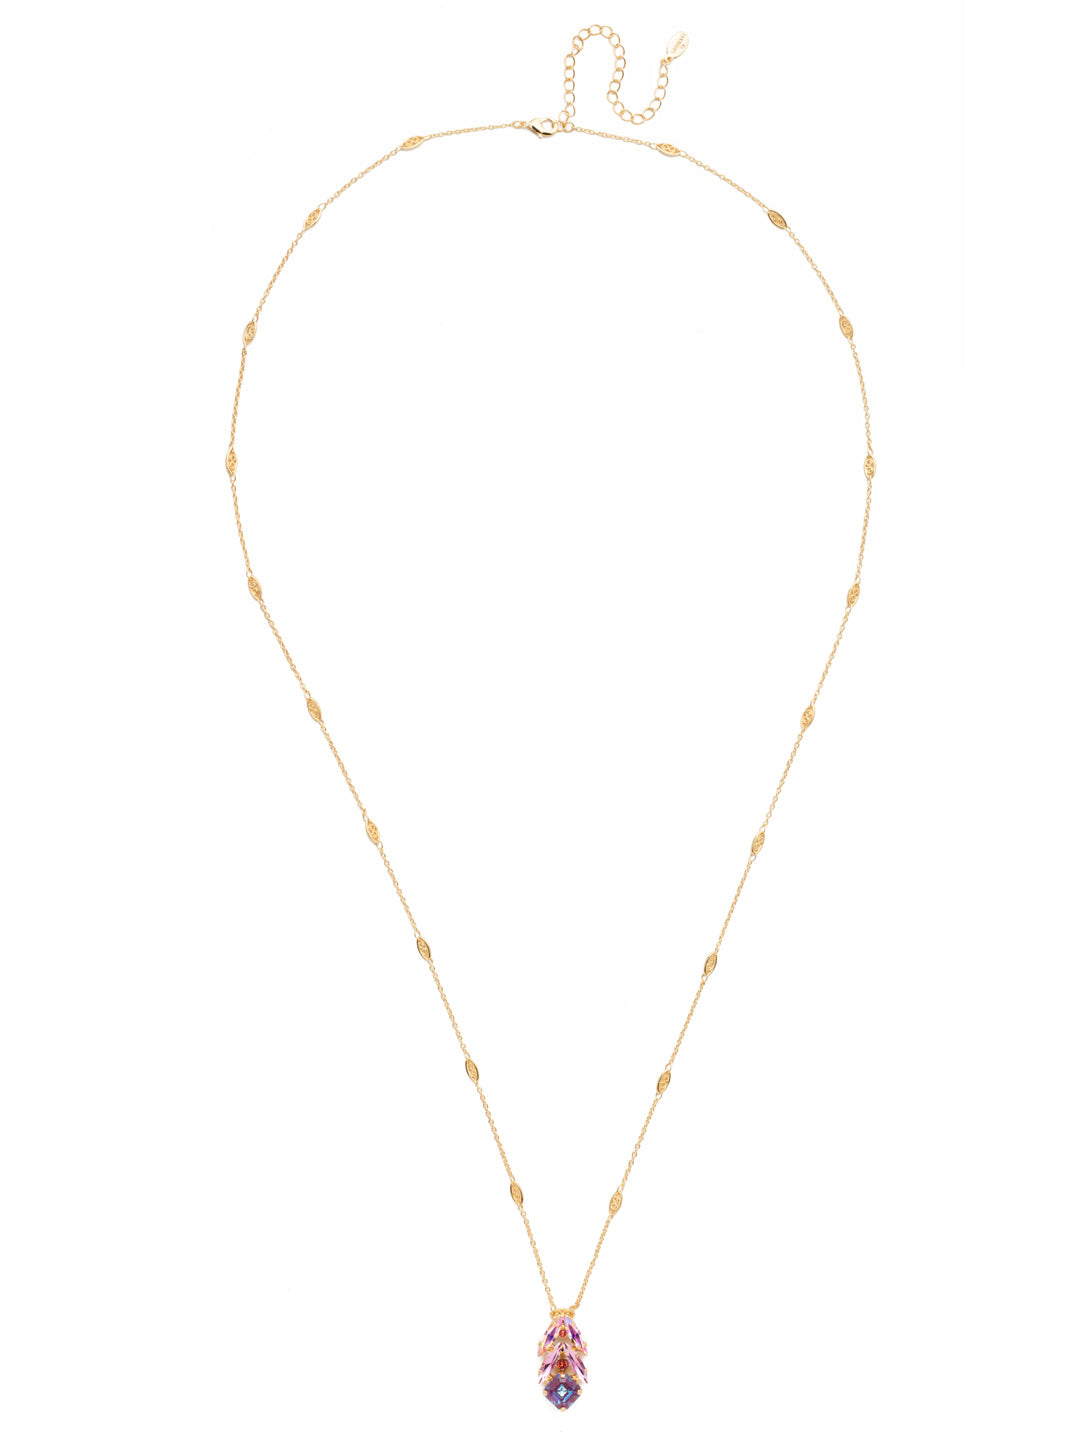 Hannah Pendant Necklace - NEN19BGBGA - <p>The Hannah Pendant Necklace is style and grace. The dripping sparkles of navette crystals around a circular center hang from a delicate metal strand that's a beauty in its own right. From Sorrelli's Begonia collection in our Bright Gold-tone finish.</p>